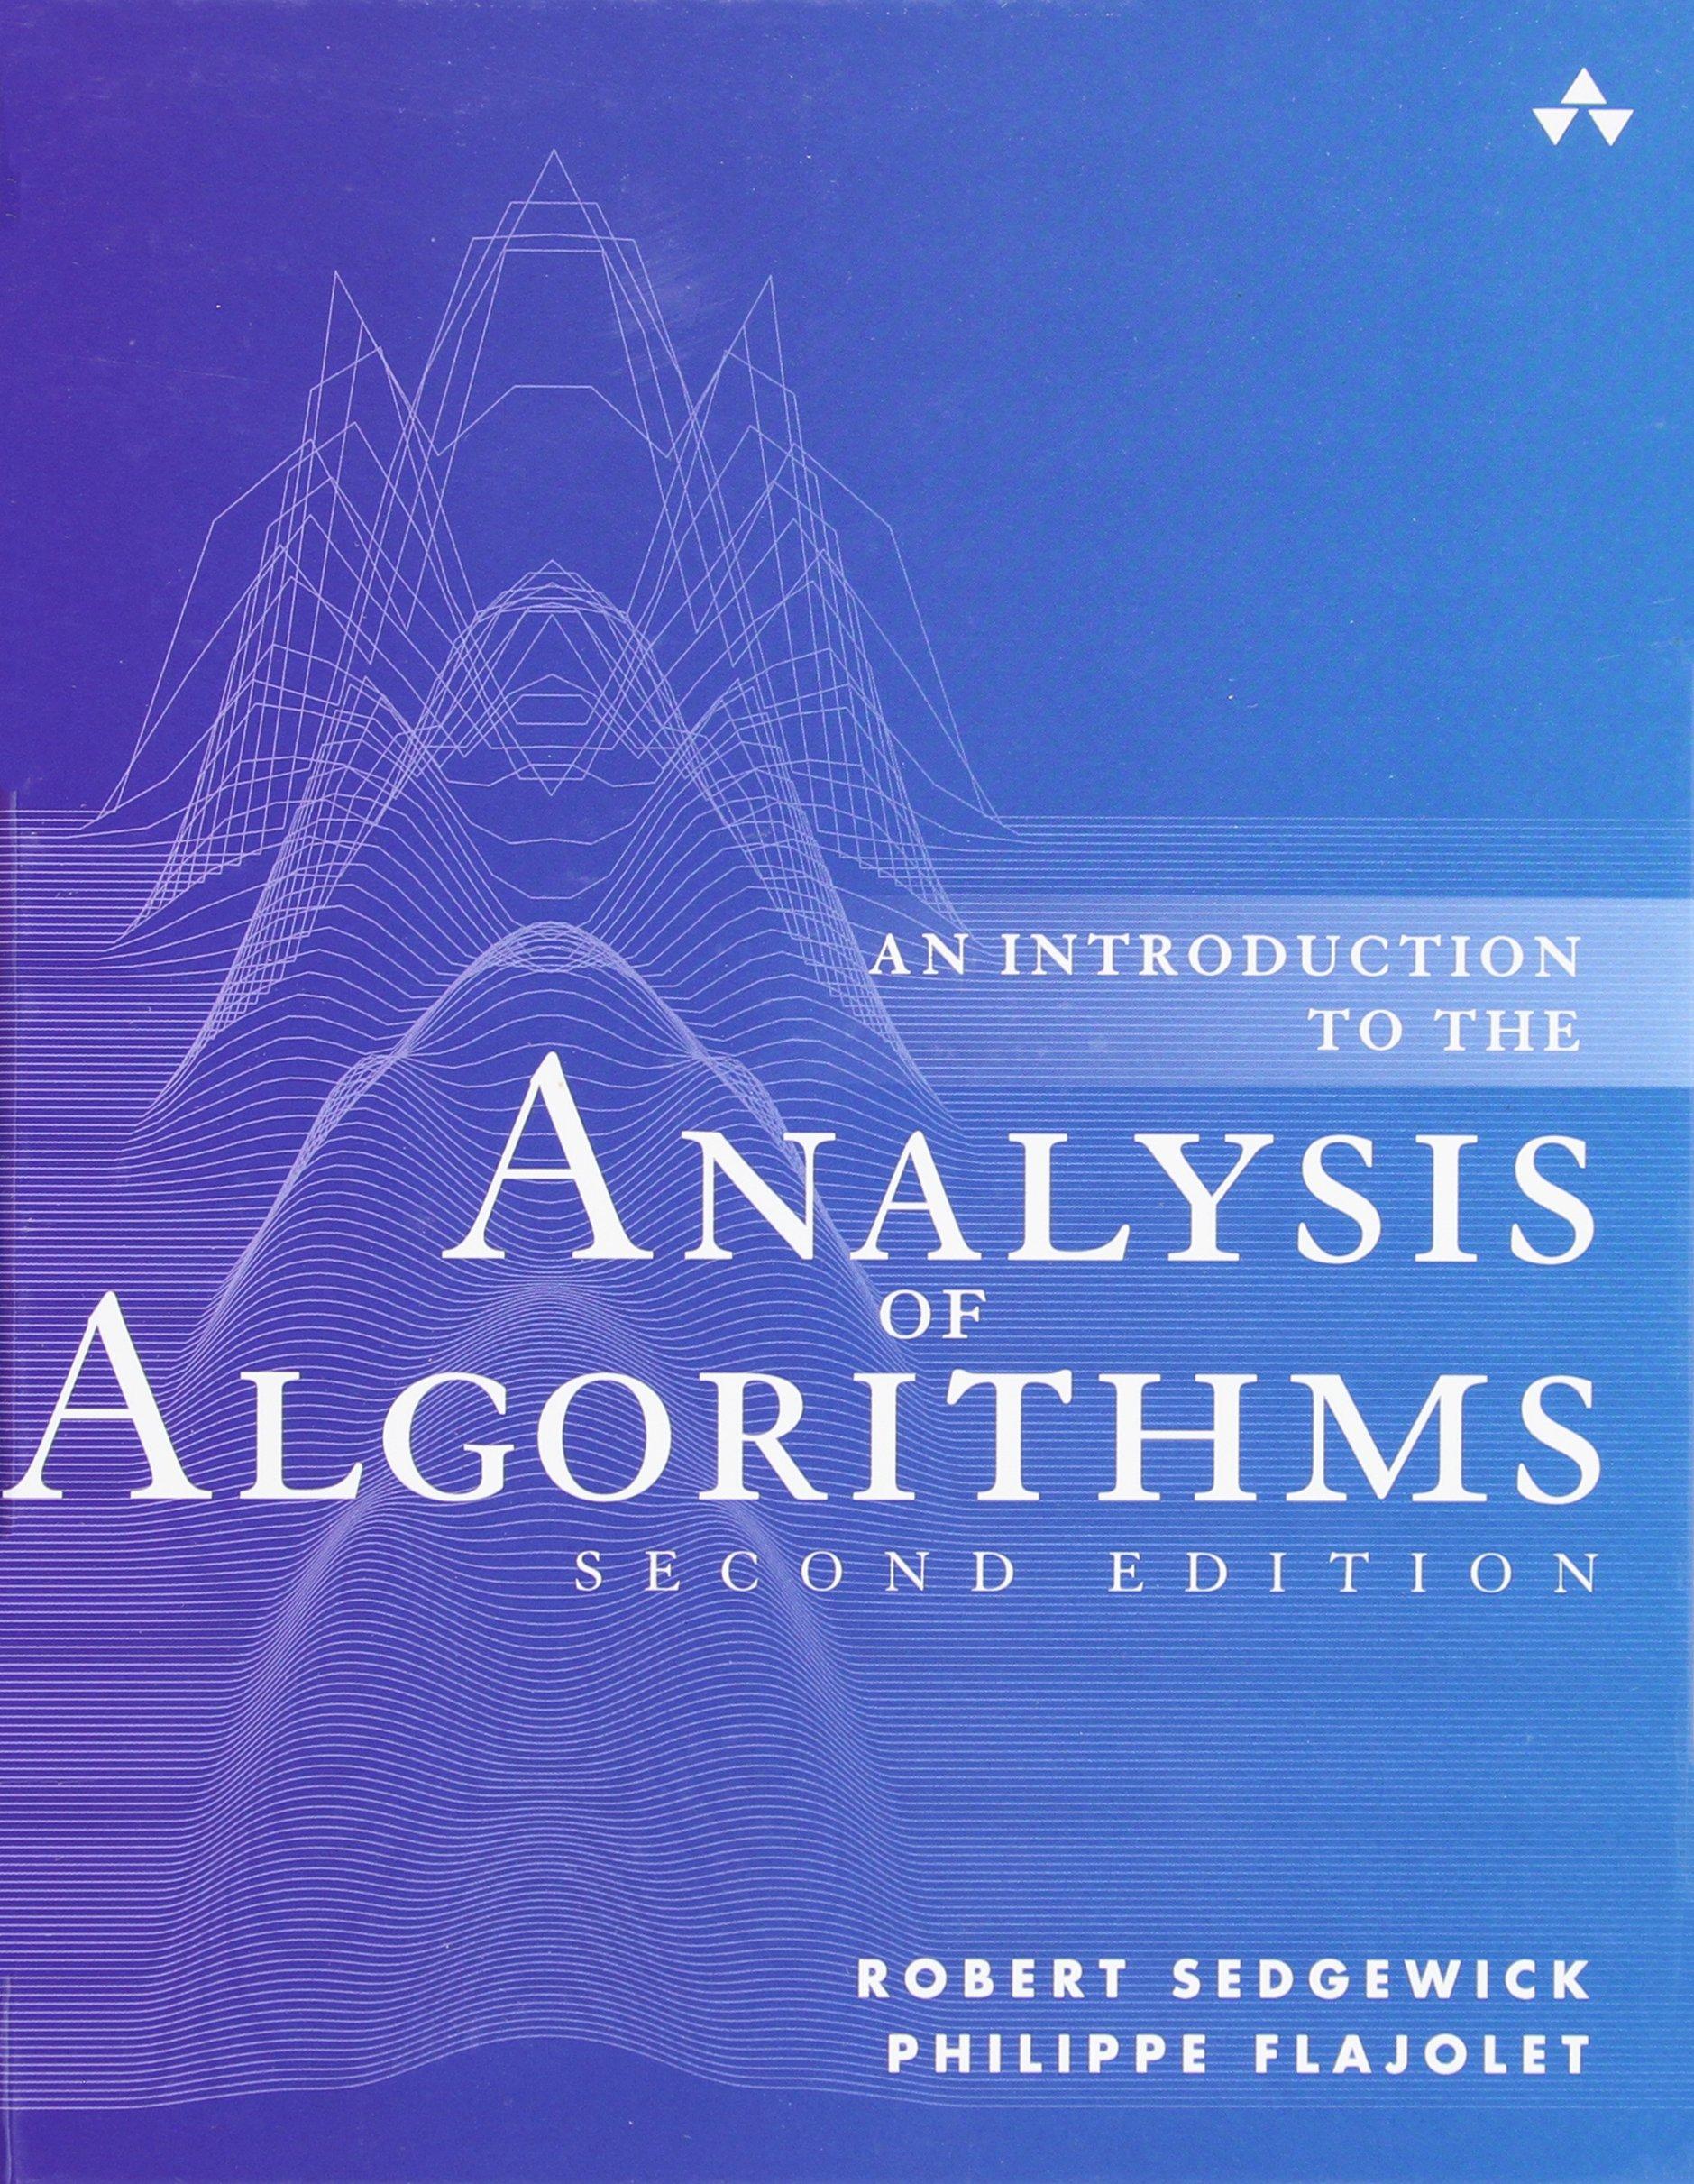 an introduction to the analysis of algorithms 2nd edition robert sedgewick, philippe flajolet 032190575x,